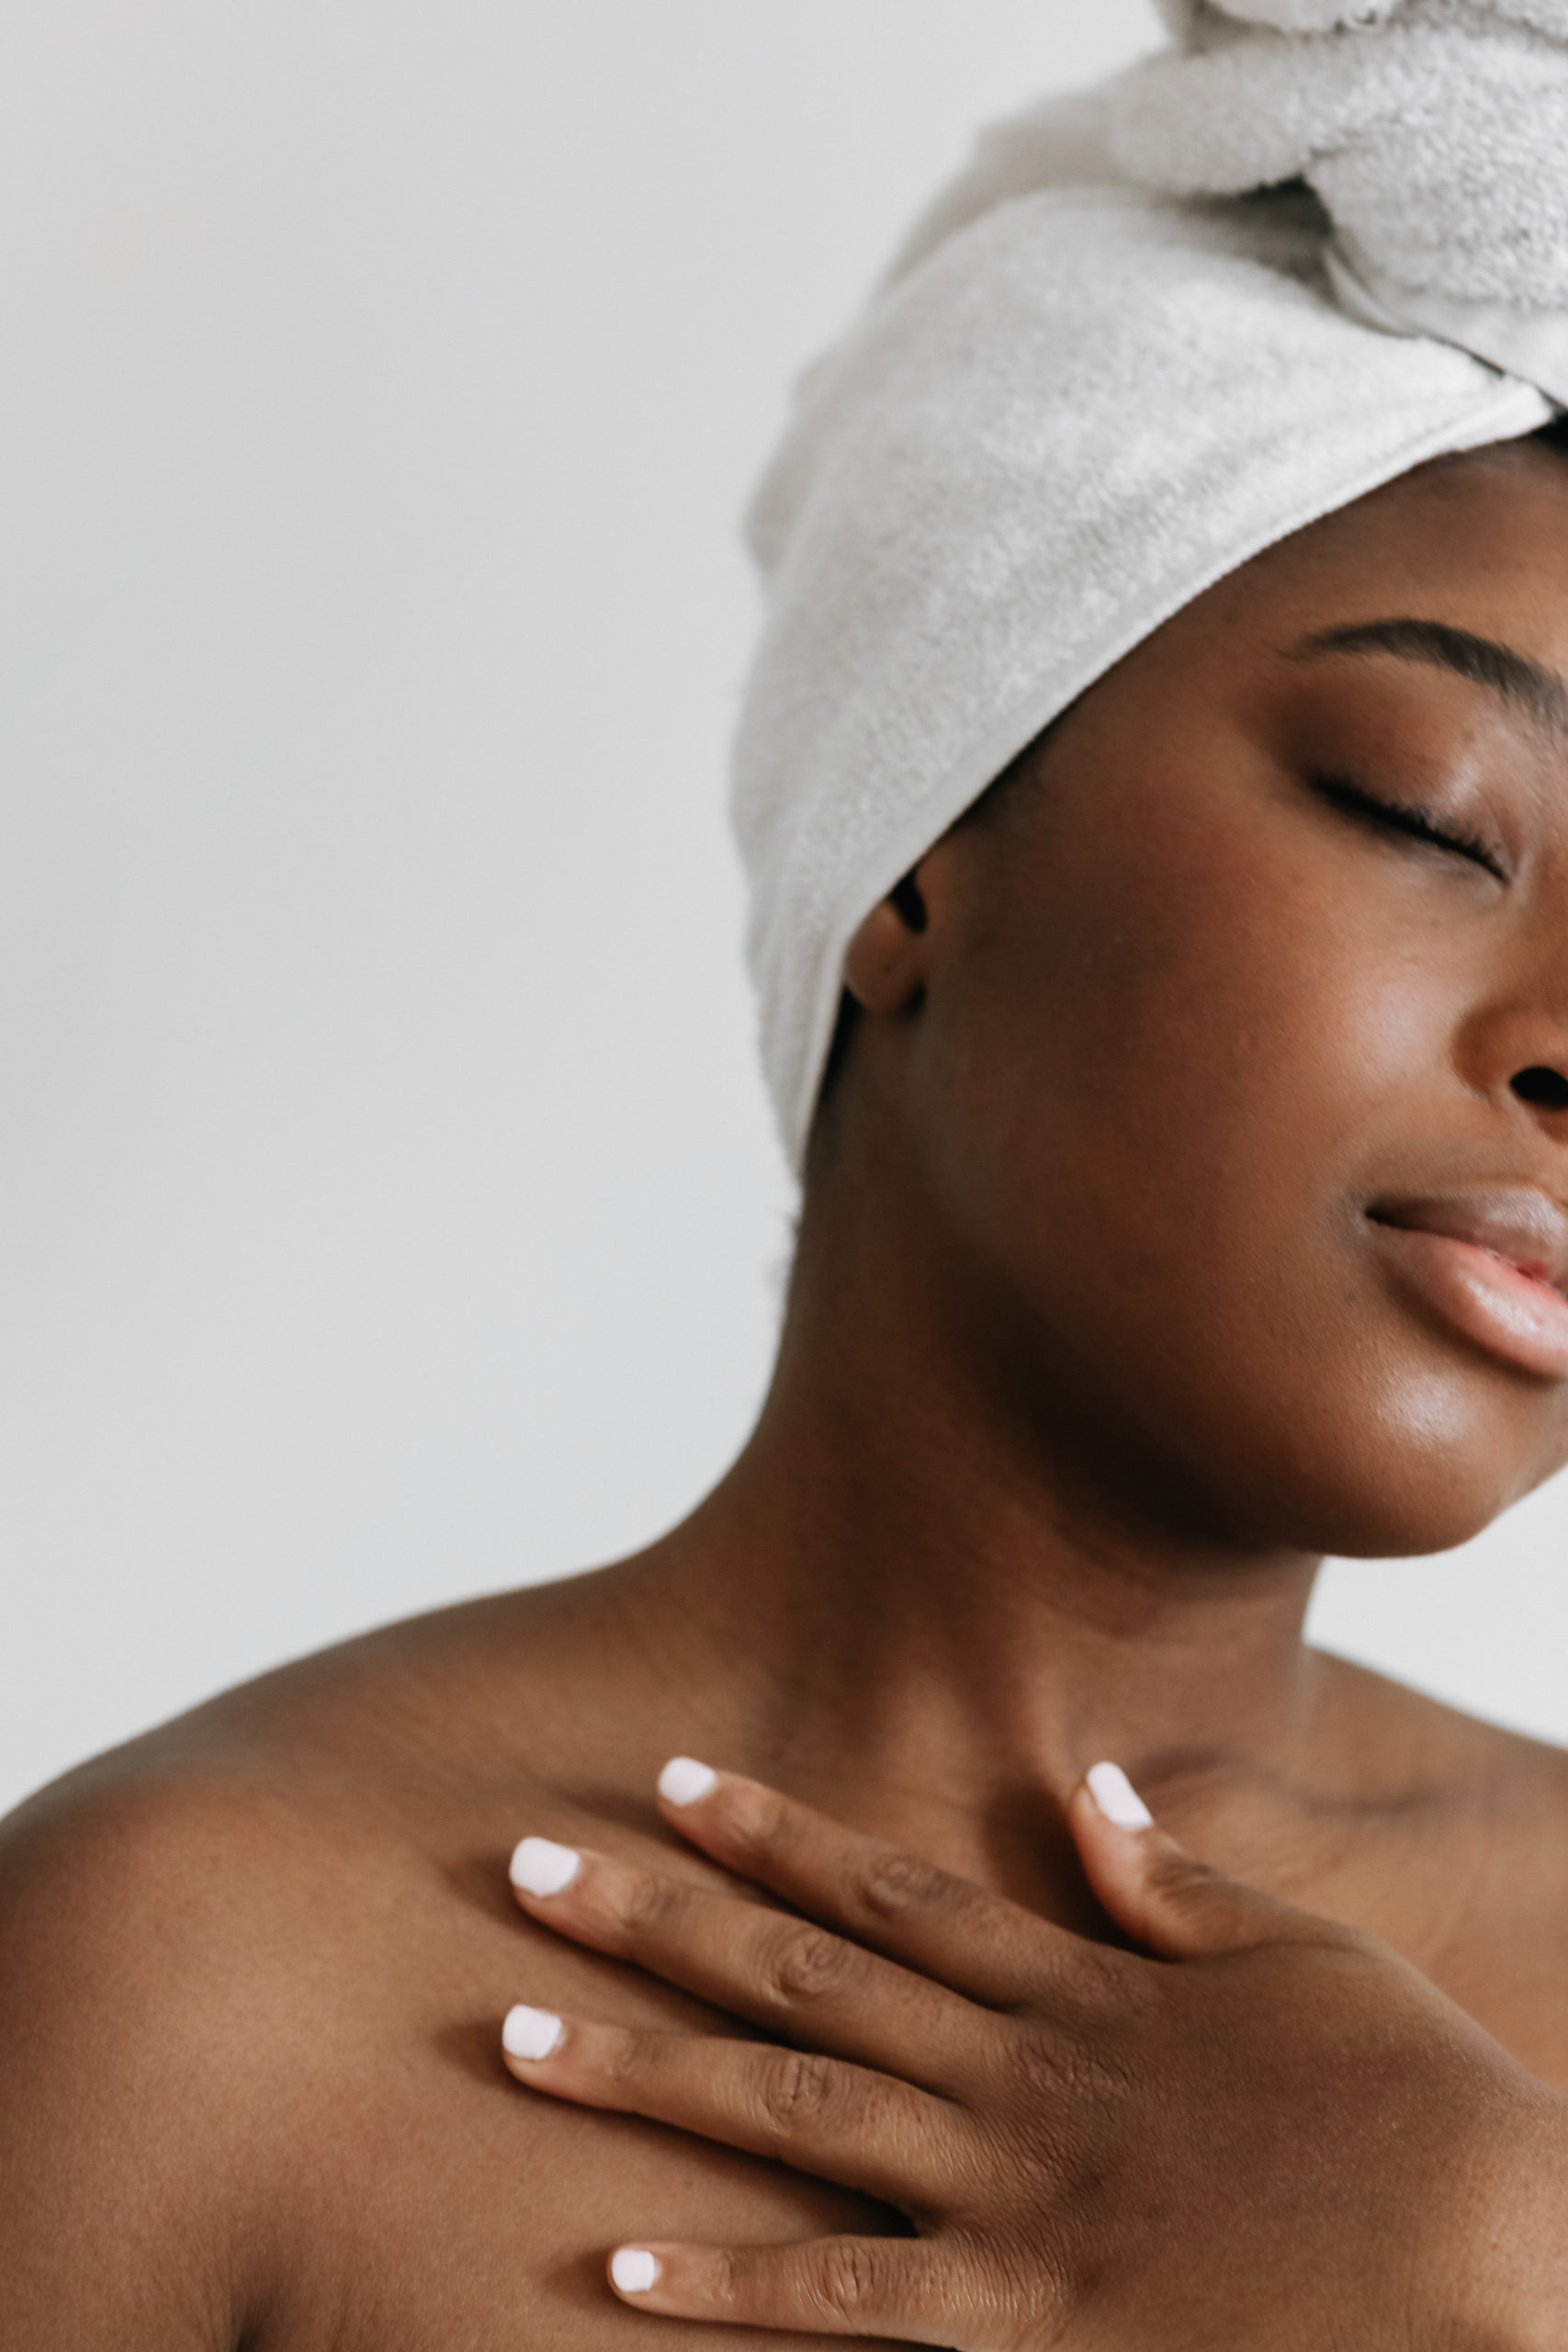 How this Oil Cleansing Method gives you Glowing, Balanced Skin